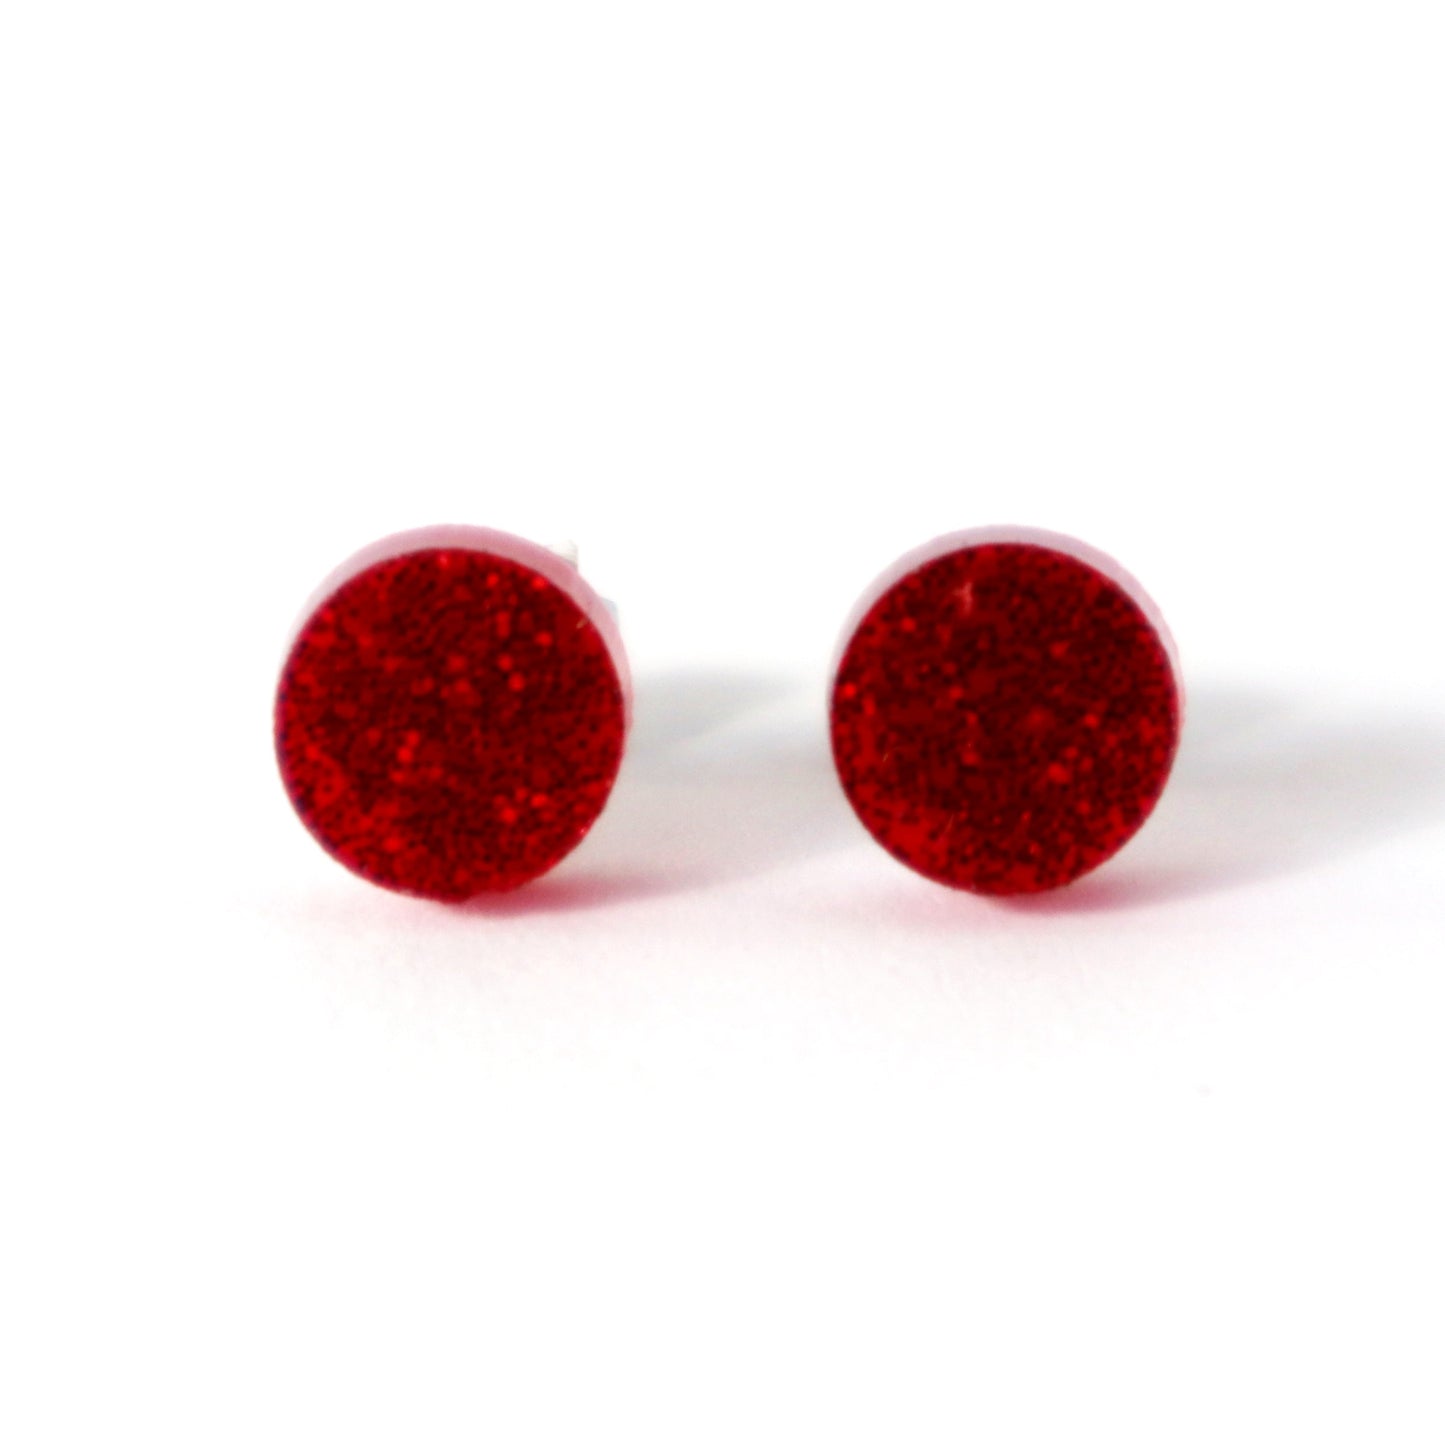 Red Glitter Earrings / Studs - acrylic circles